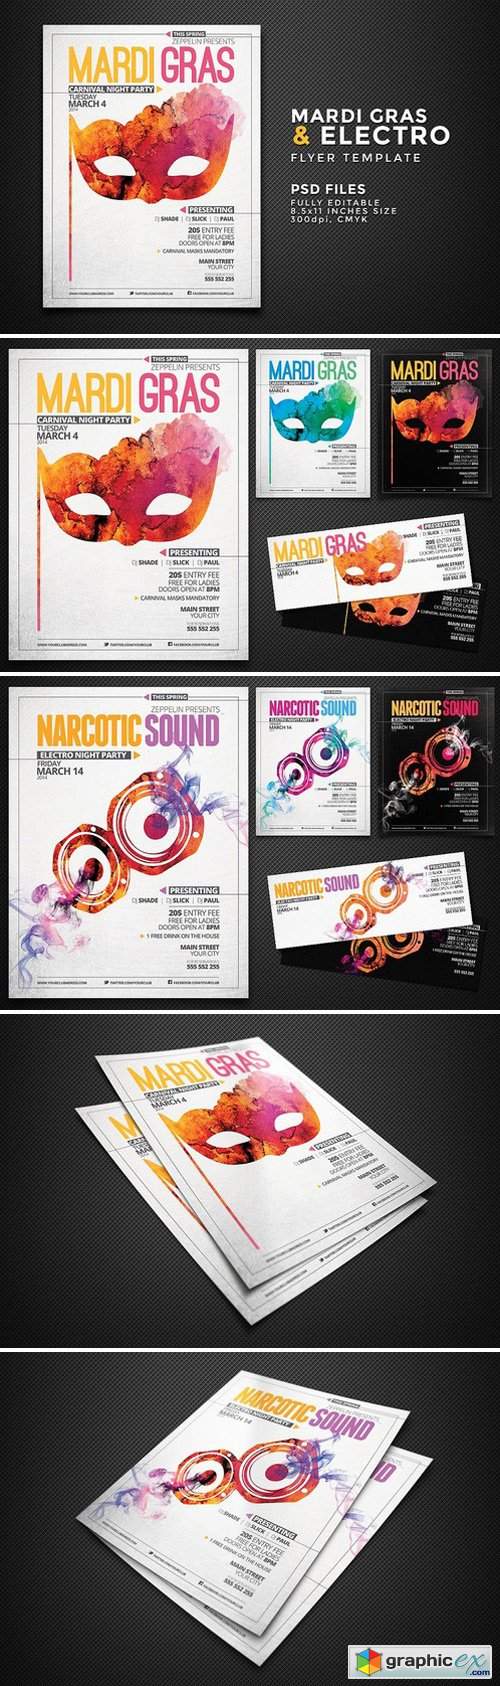 Mardi Gras and Other Events Flyer Template